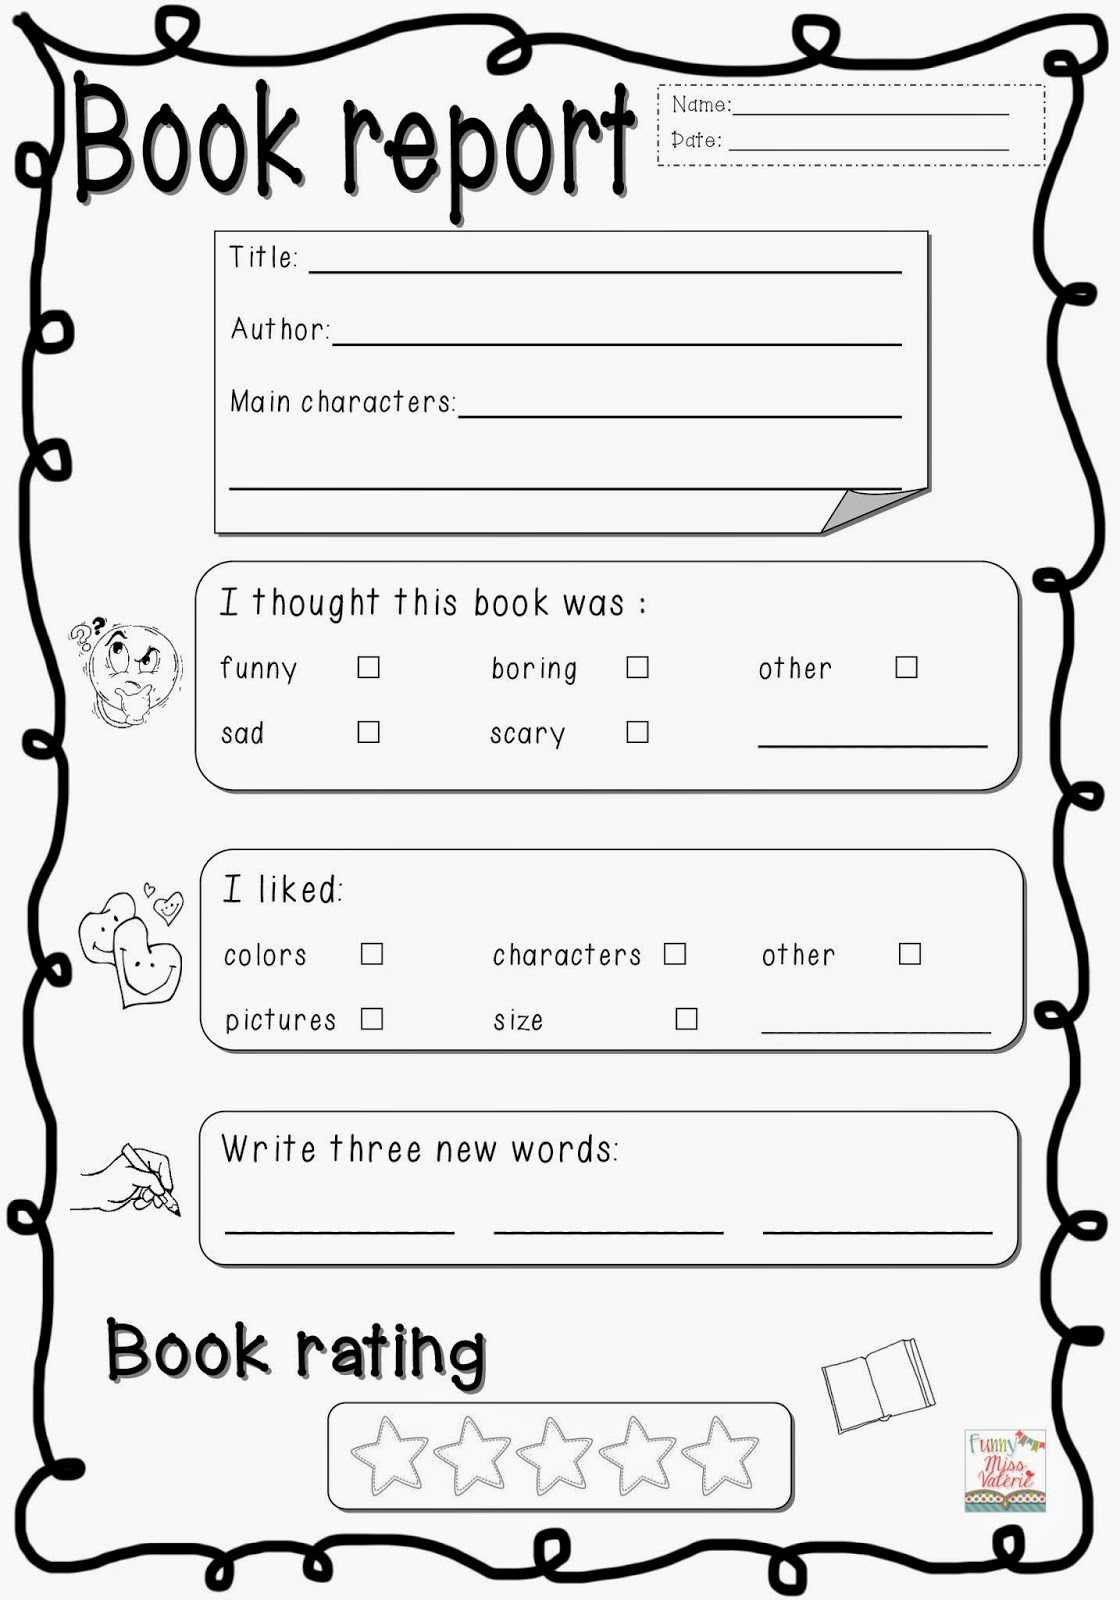 Online Book Report - Dalep.midnightpig.co With Regard To Skeleton Book Report Template